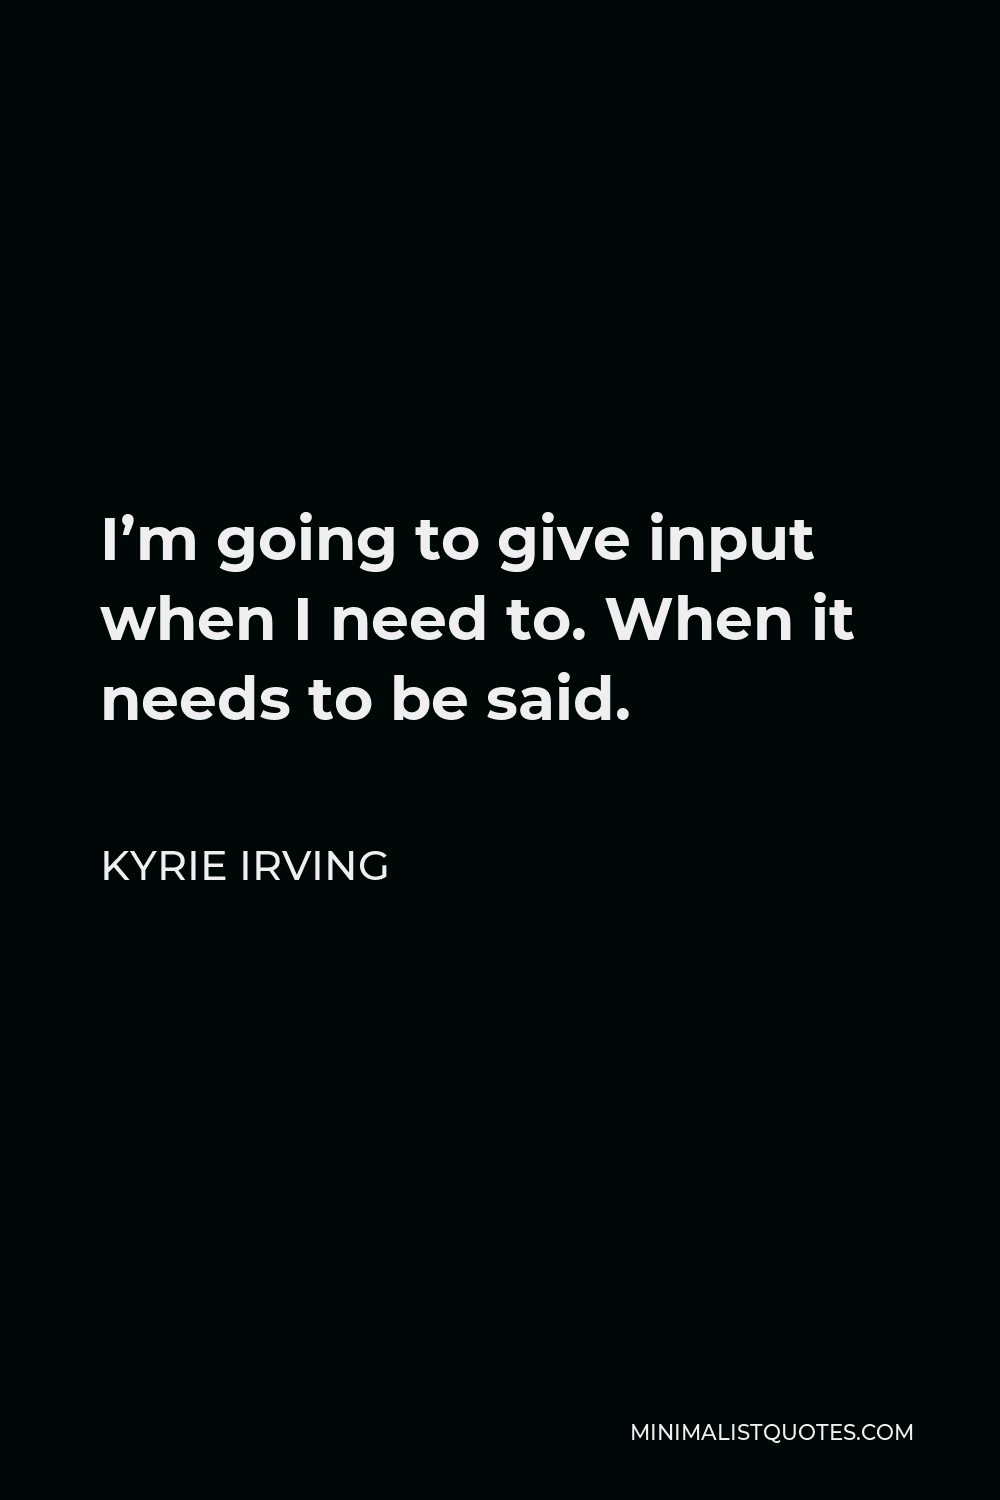 Kyrie Irving Quote - I’m going to give input when I need to. When it needs to be said.